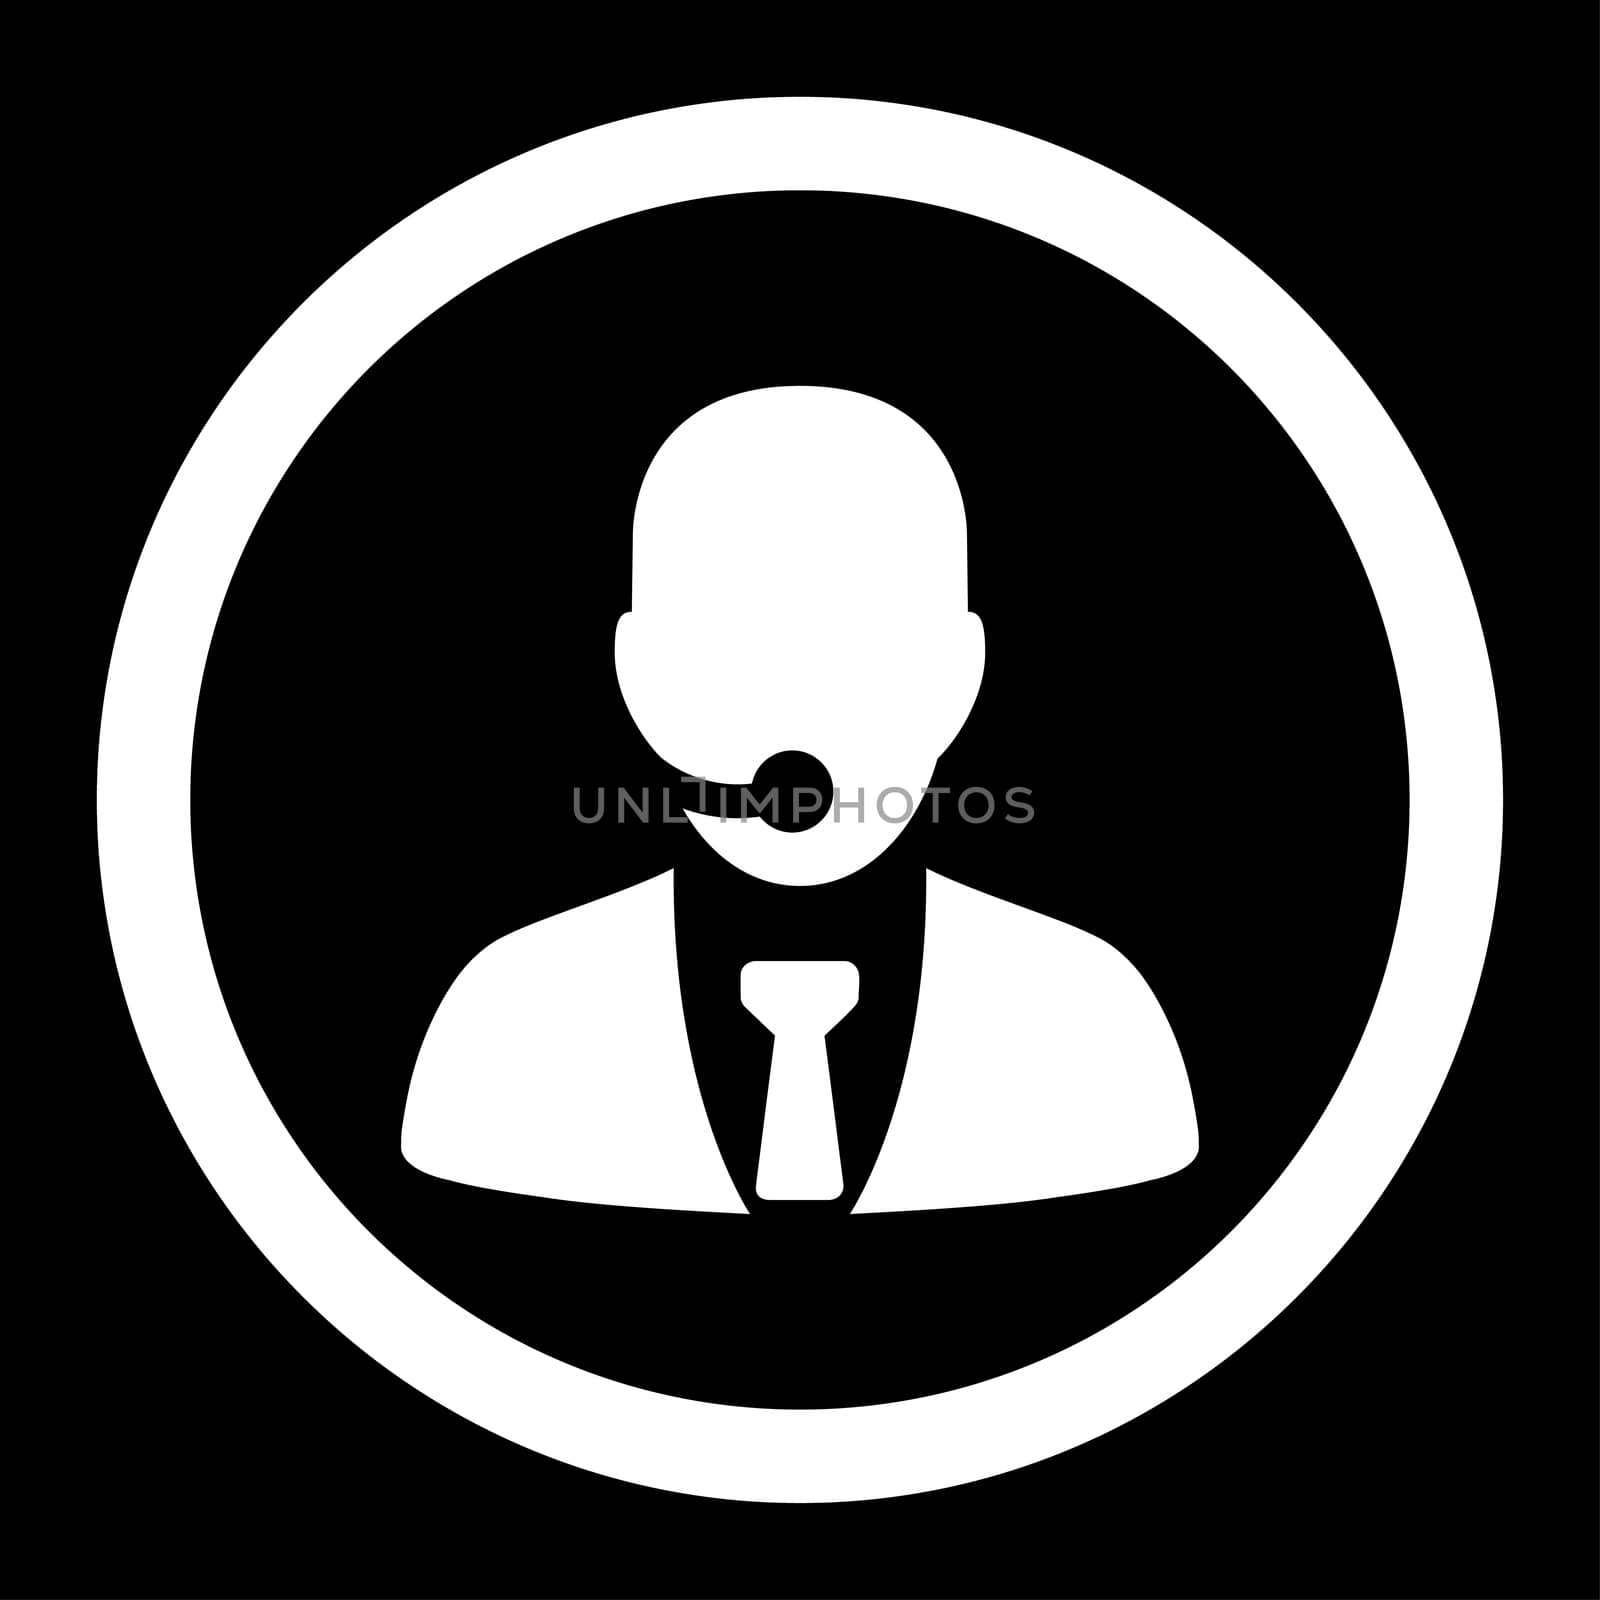 Call center operator glyph icon. This rounded flat symbol is drawn with white color on a black background.